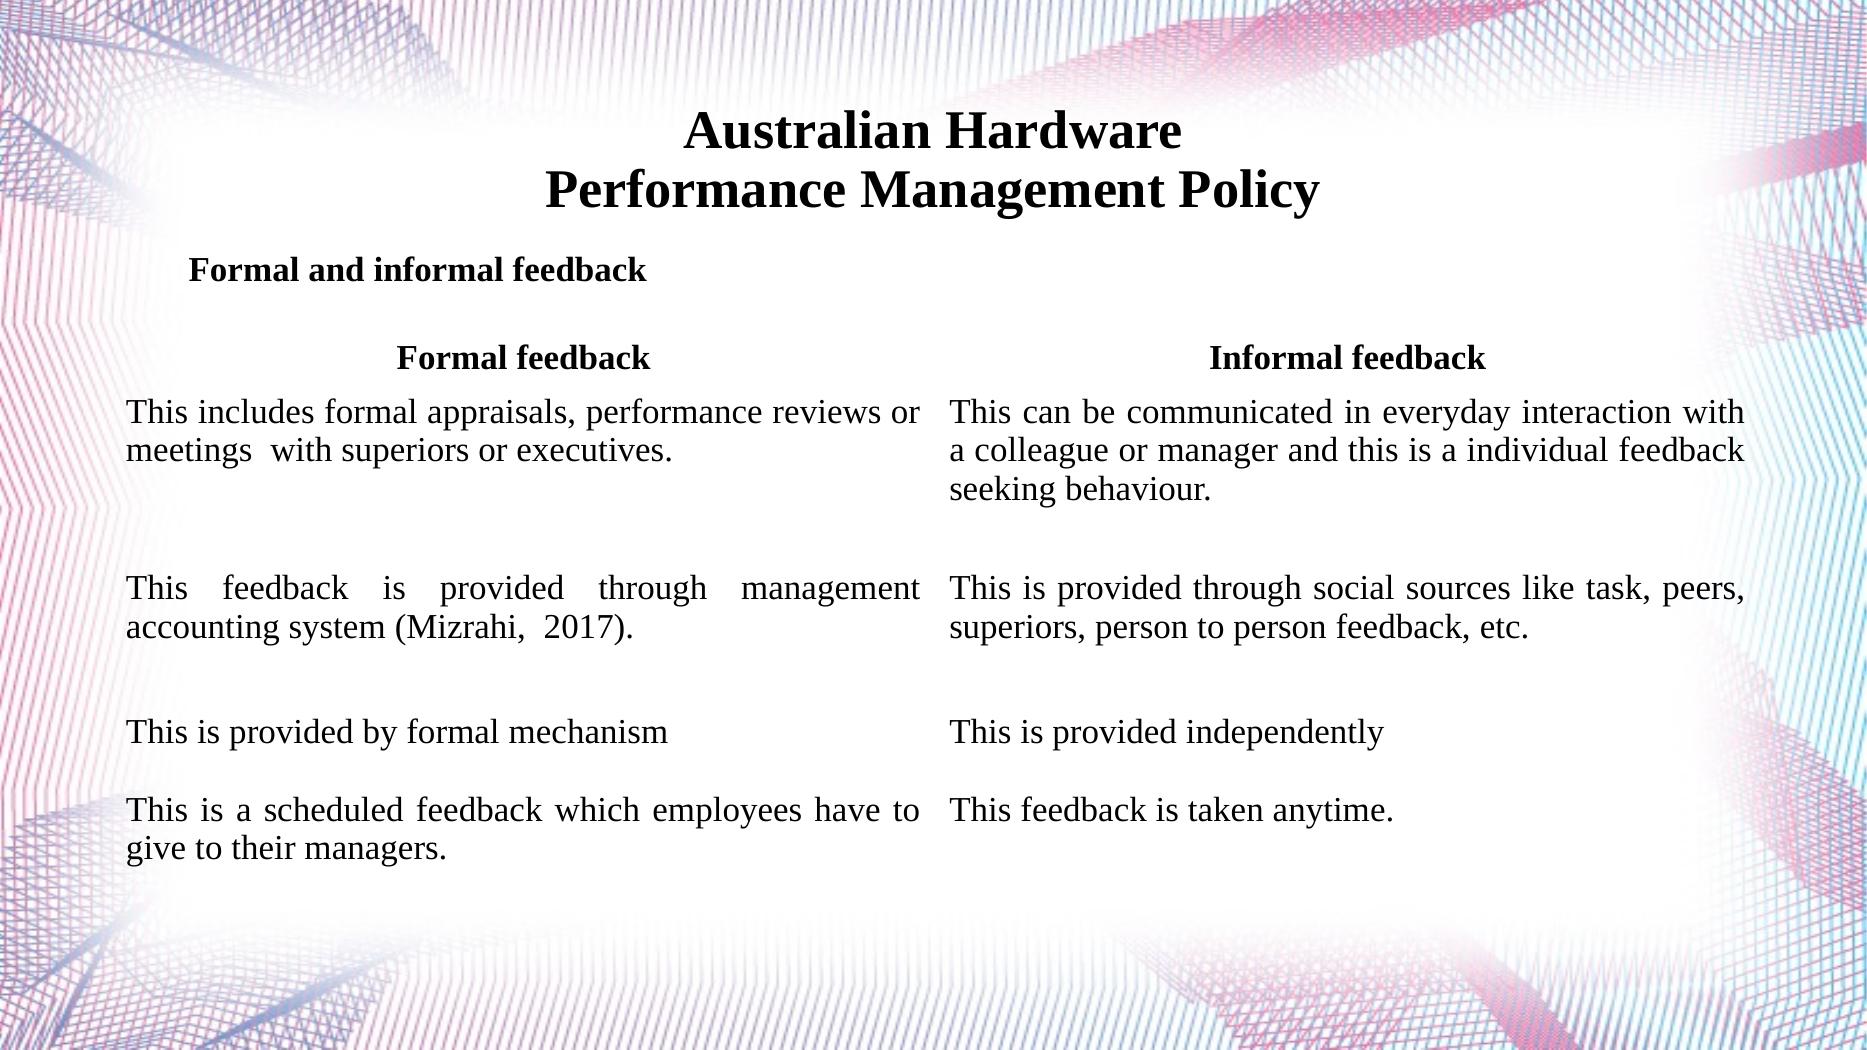 Performance Management Policy at Australian Hardware_3